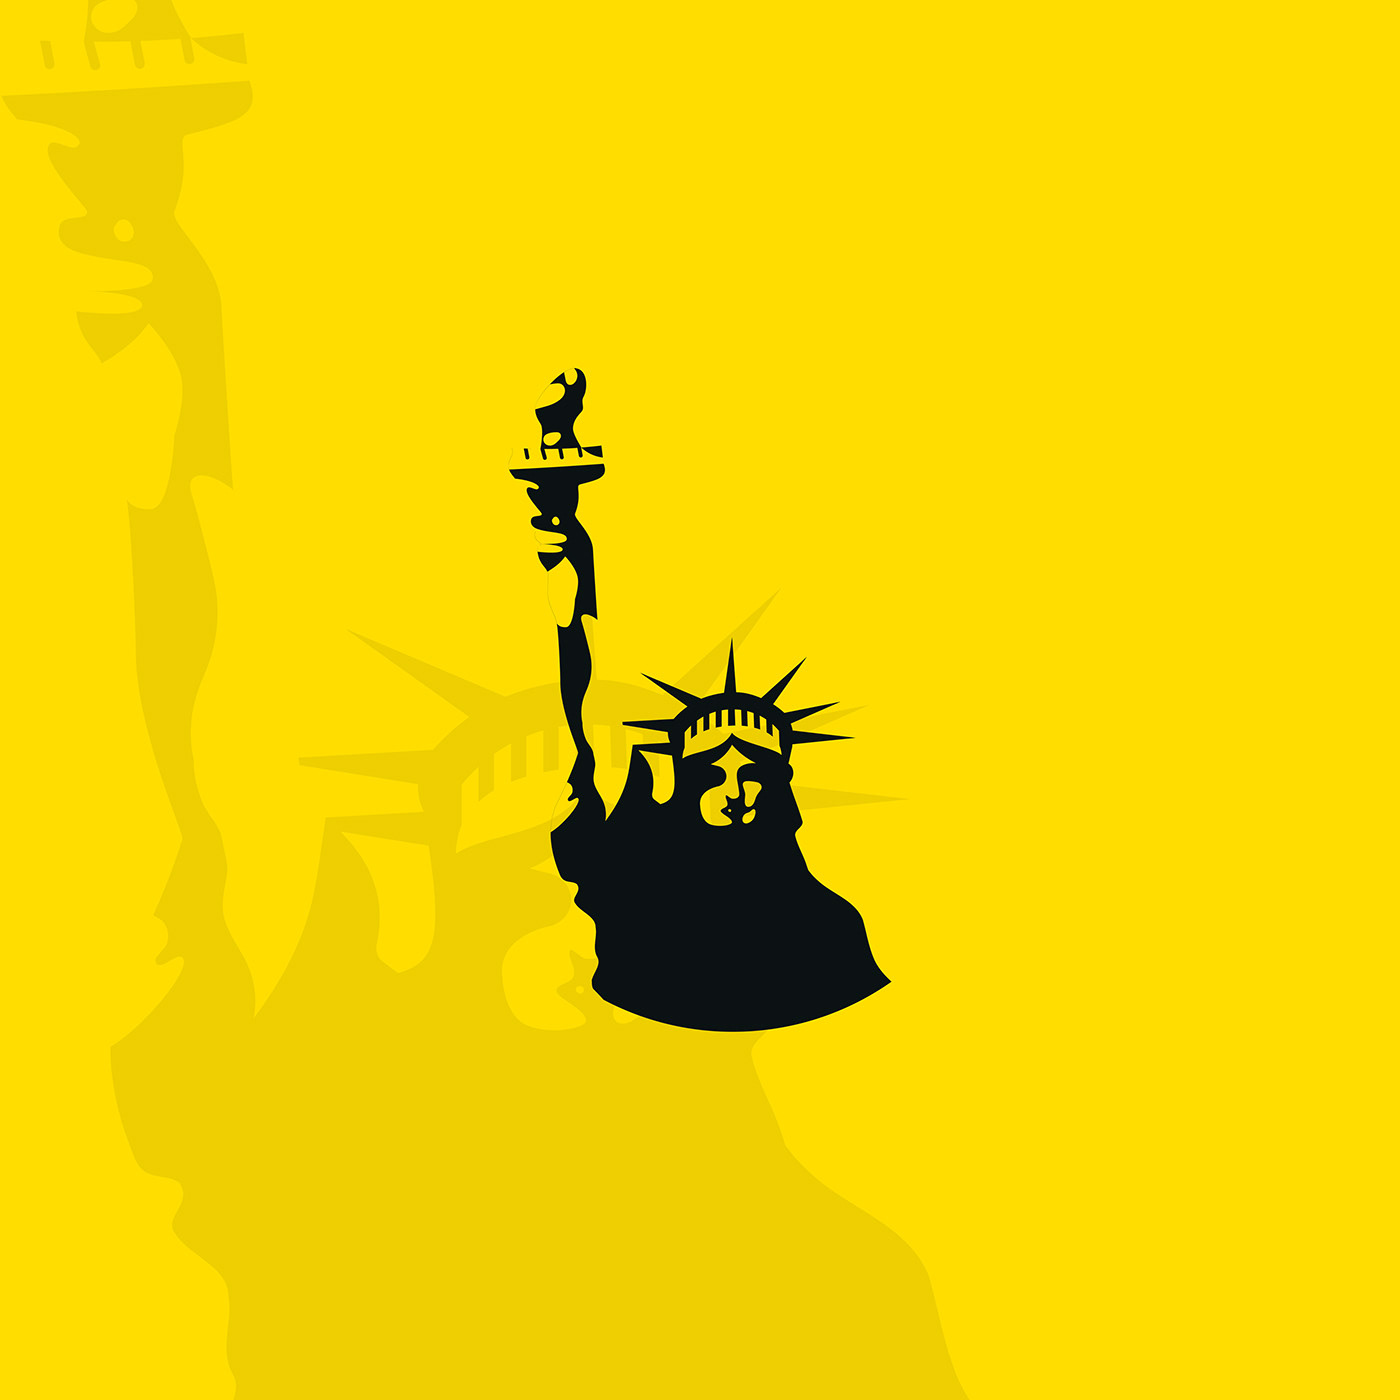 statue of liberty on Behance